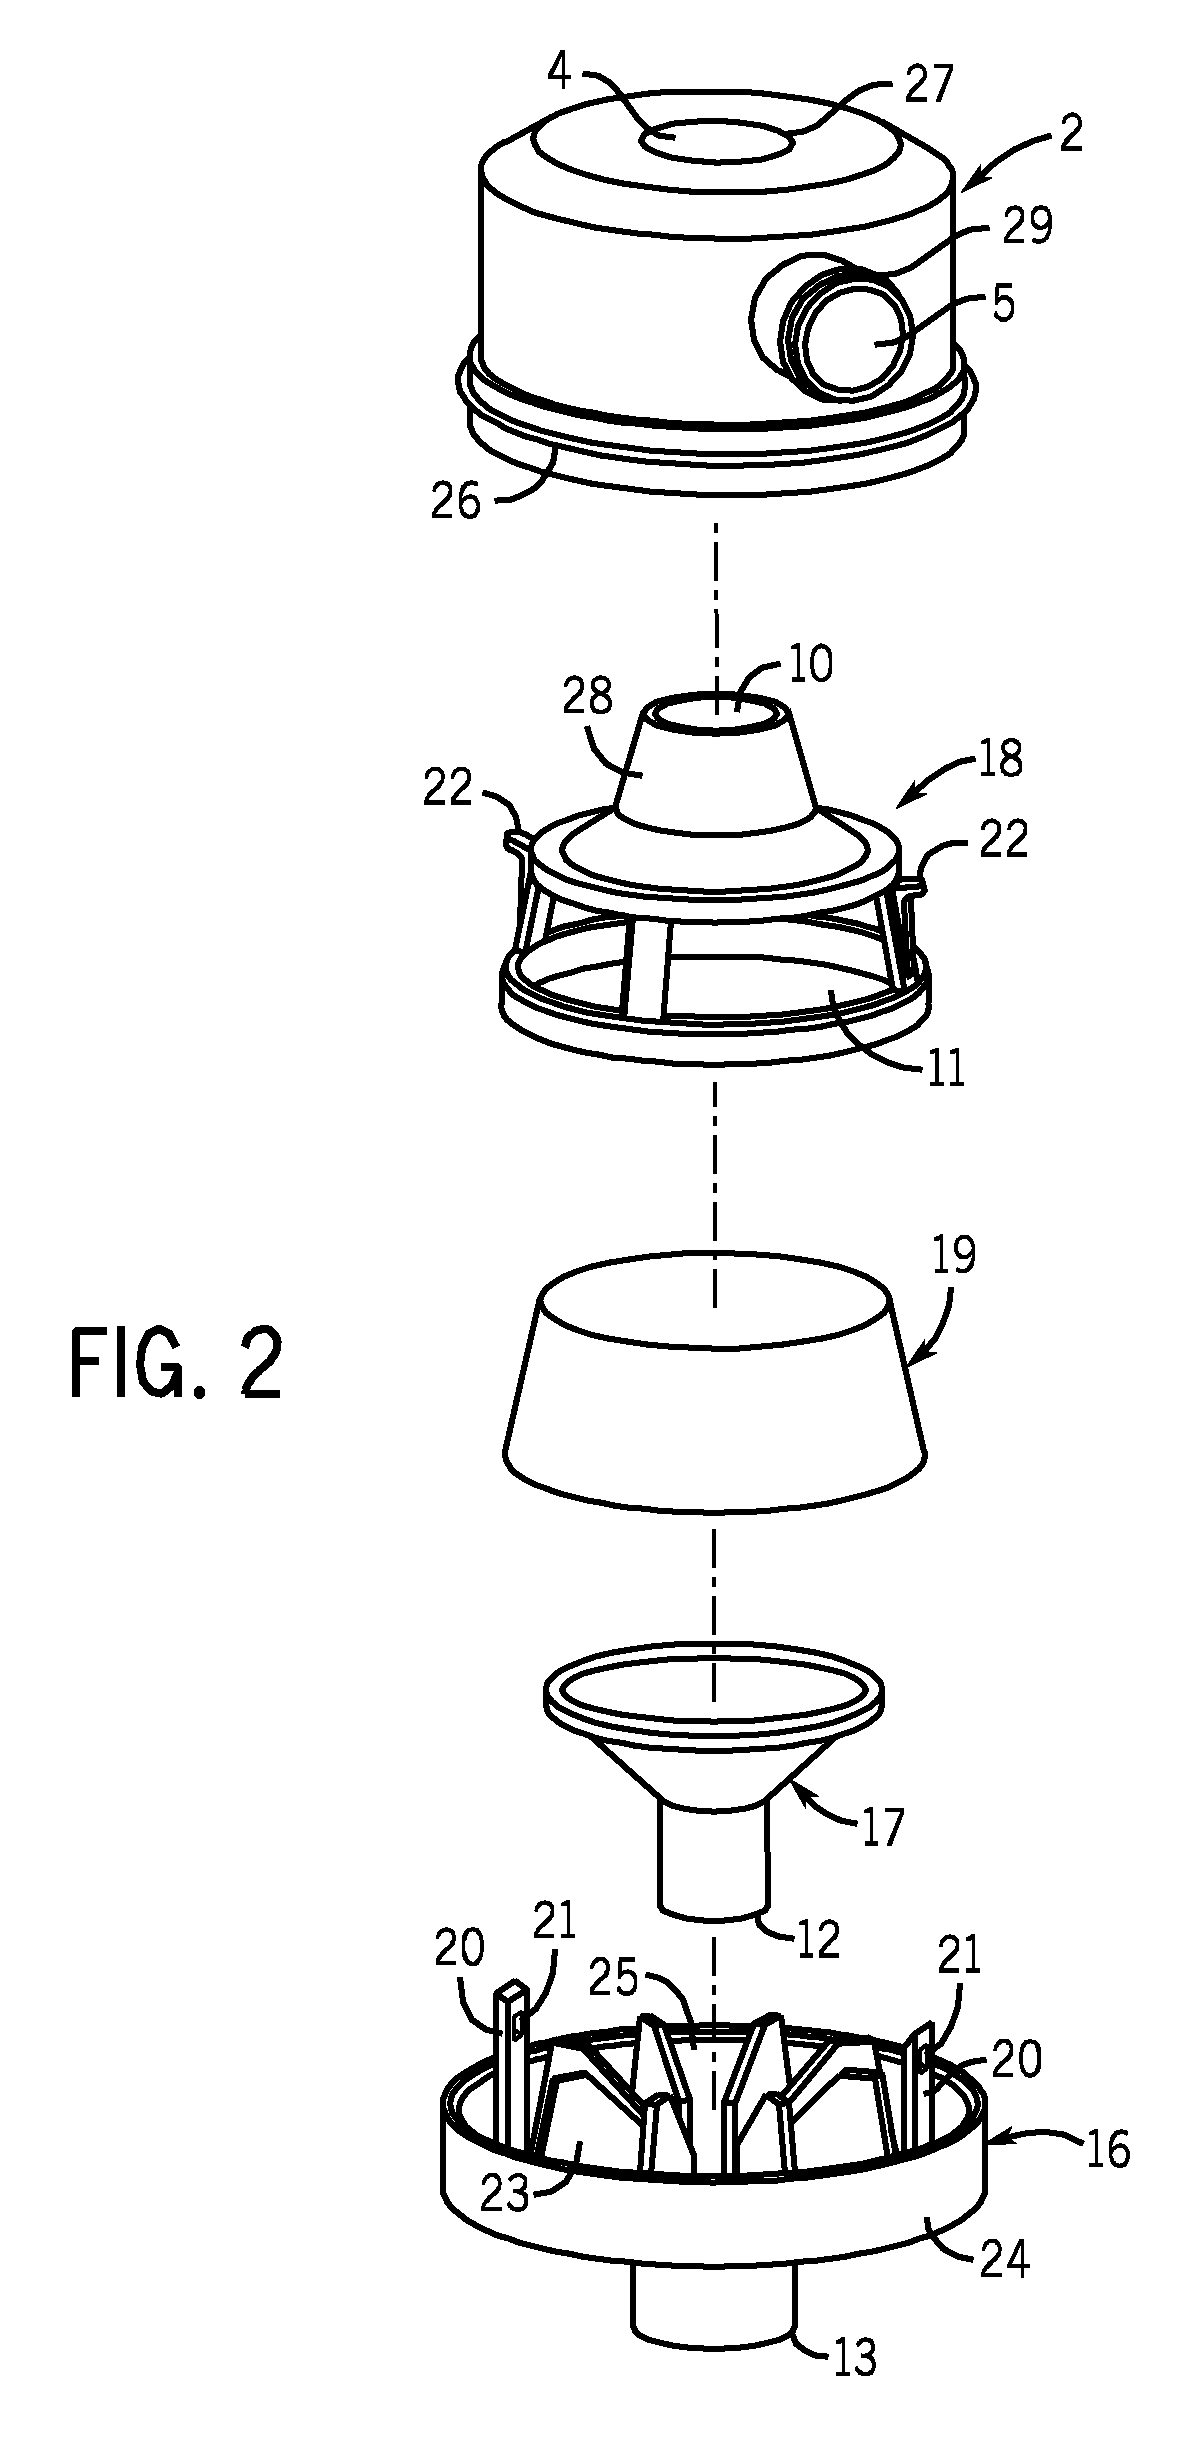 Respiratory connector and arrangement for connecting an inspiratory tube and an expiratory tube to a medical apparatus